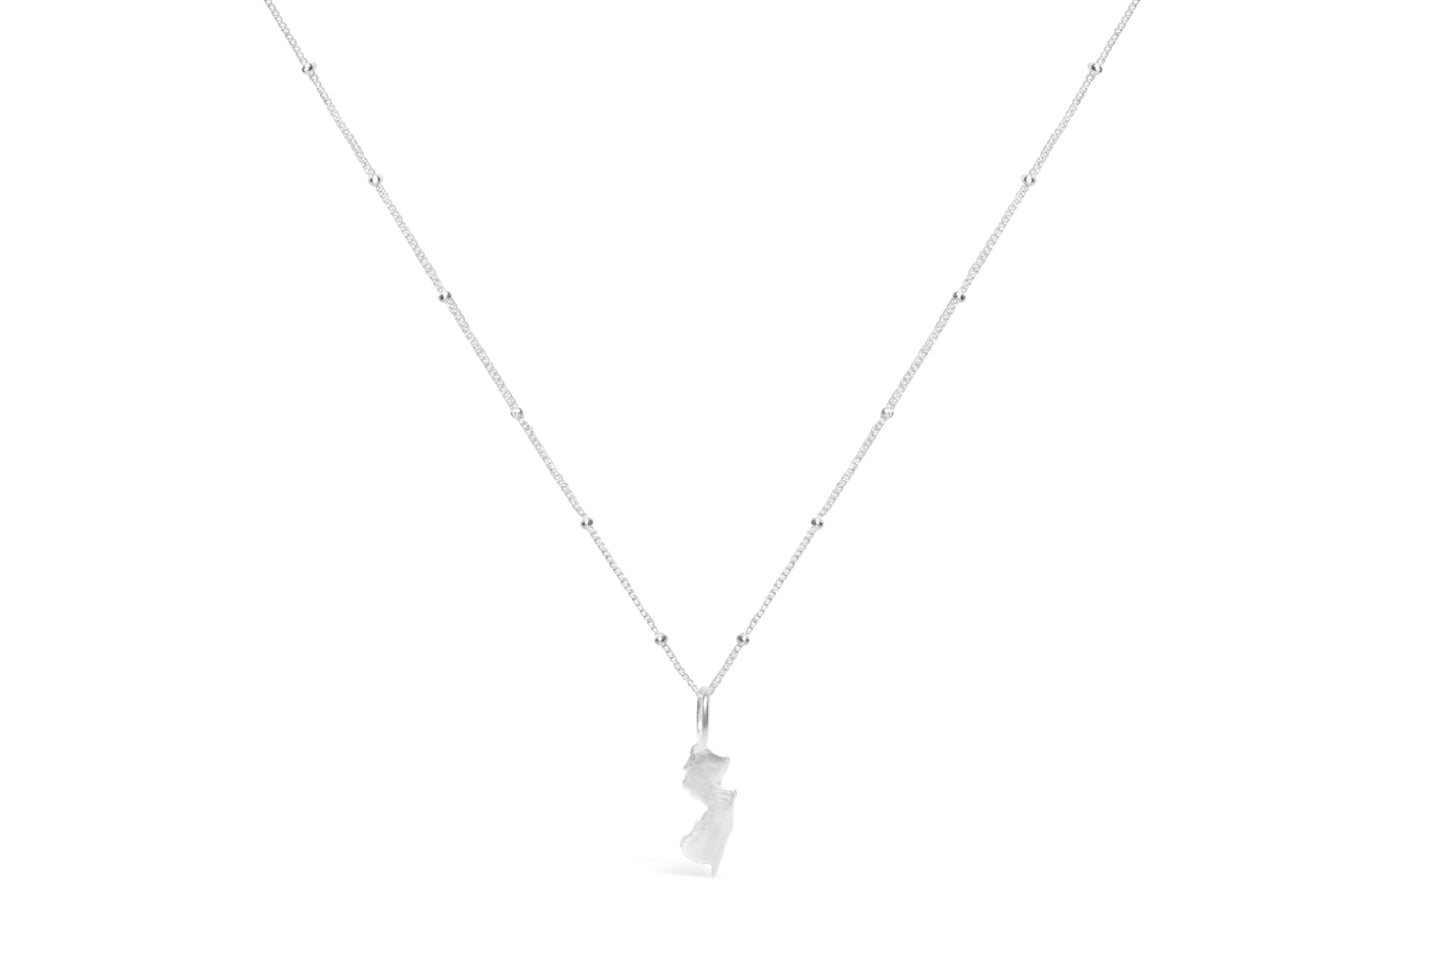 Charm & Chain State Necklace - New Jersey